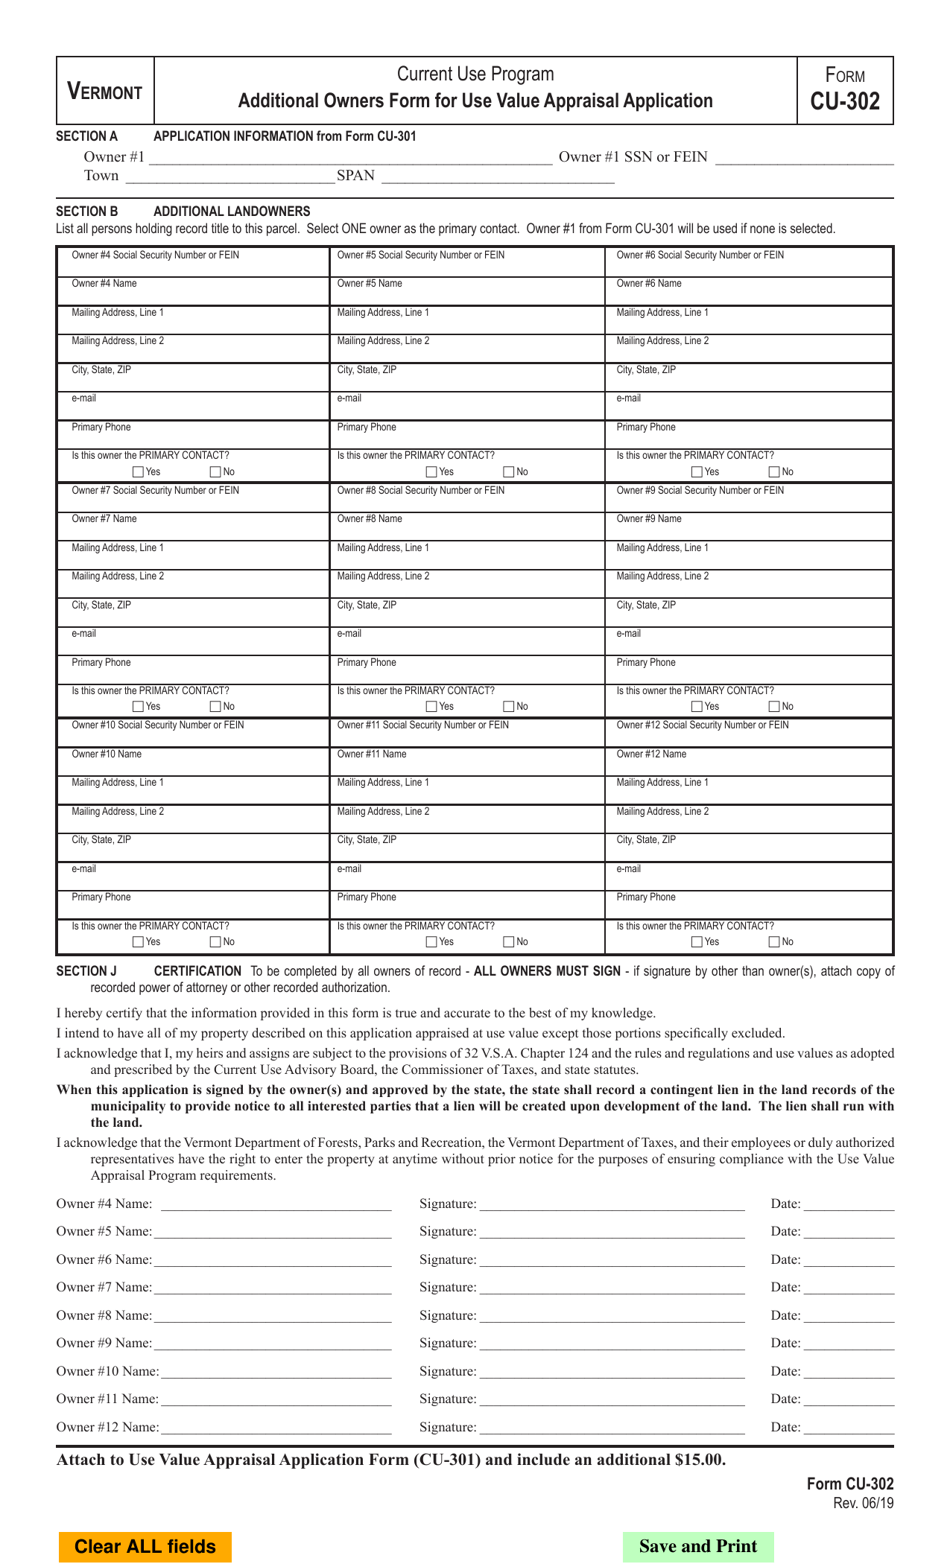 Form CU-302 Additional Owners Form for Use Value Appraisal Application - Vermont, Page 1